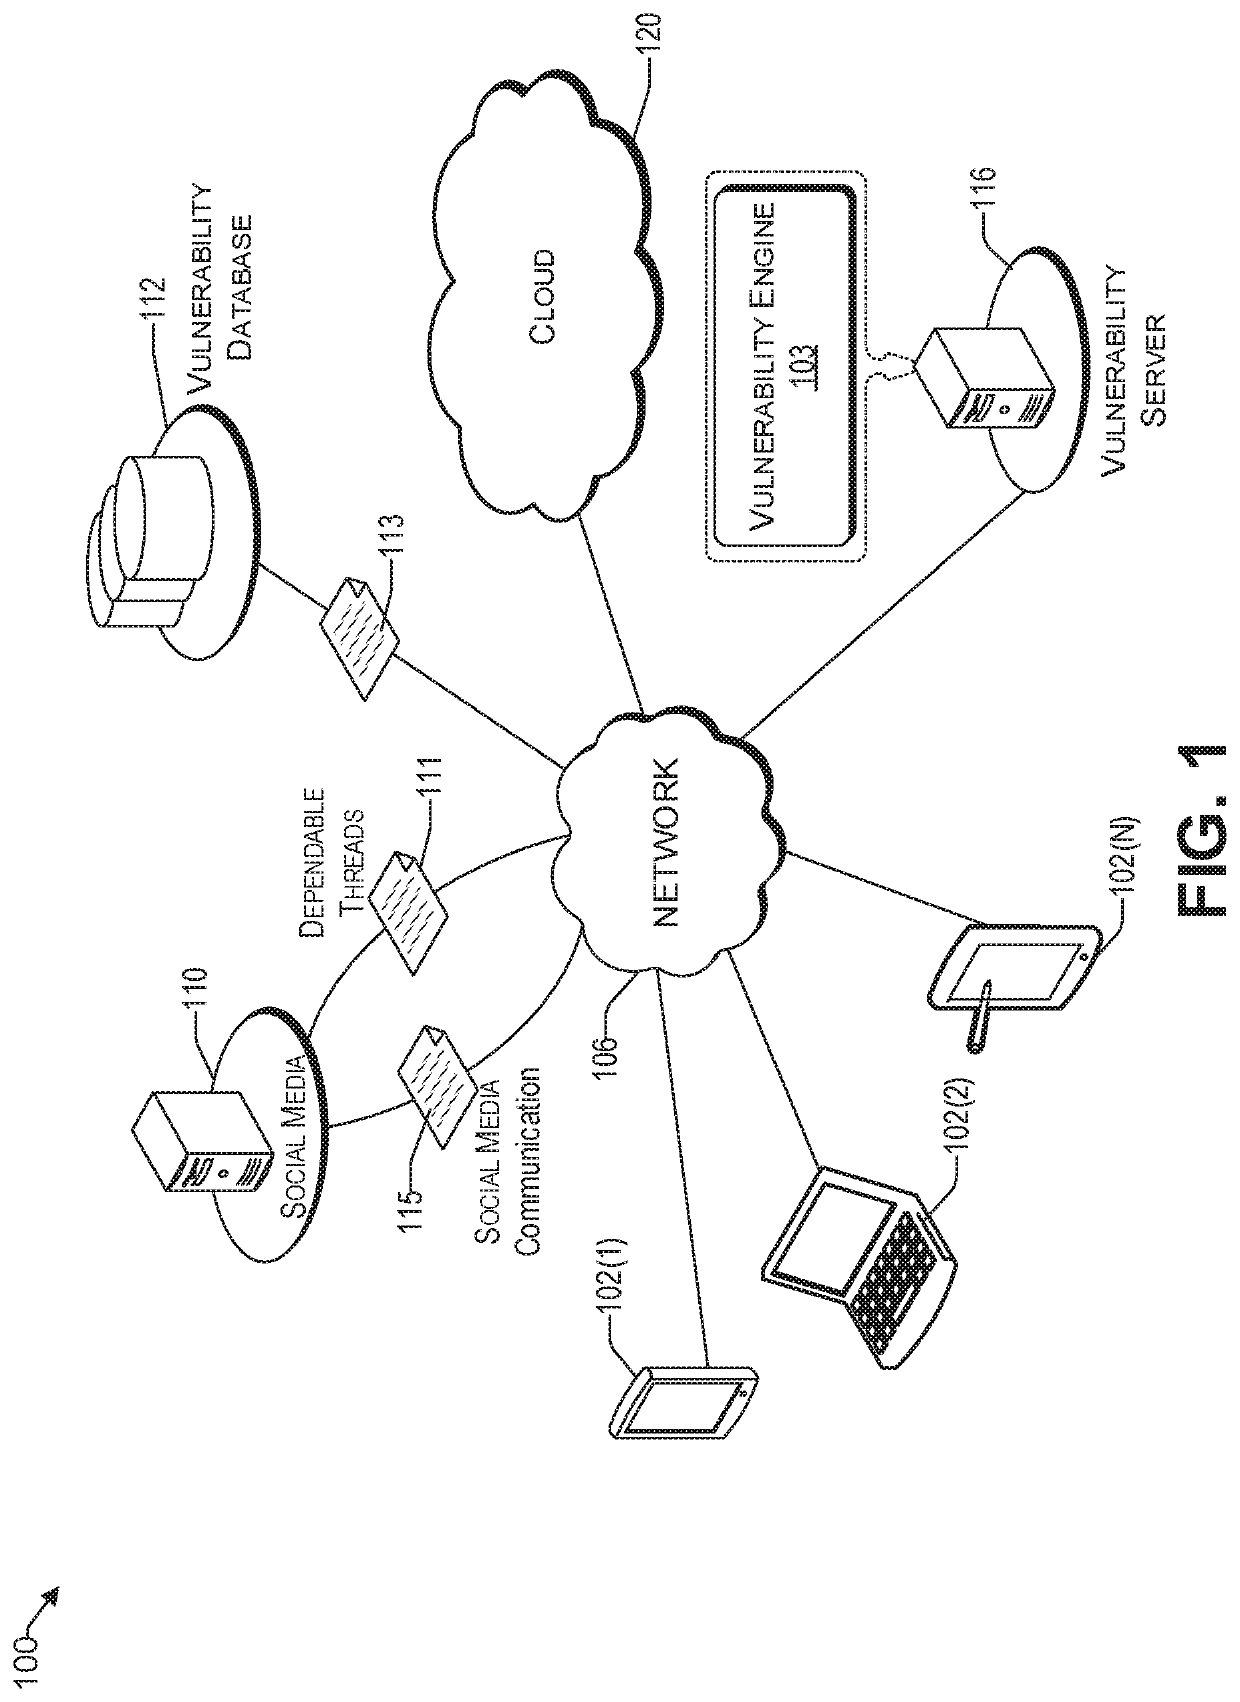 Detecting a root cause for a vulnerability using subjective logic in social media